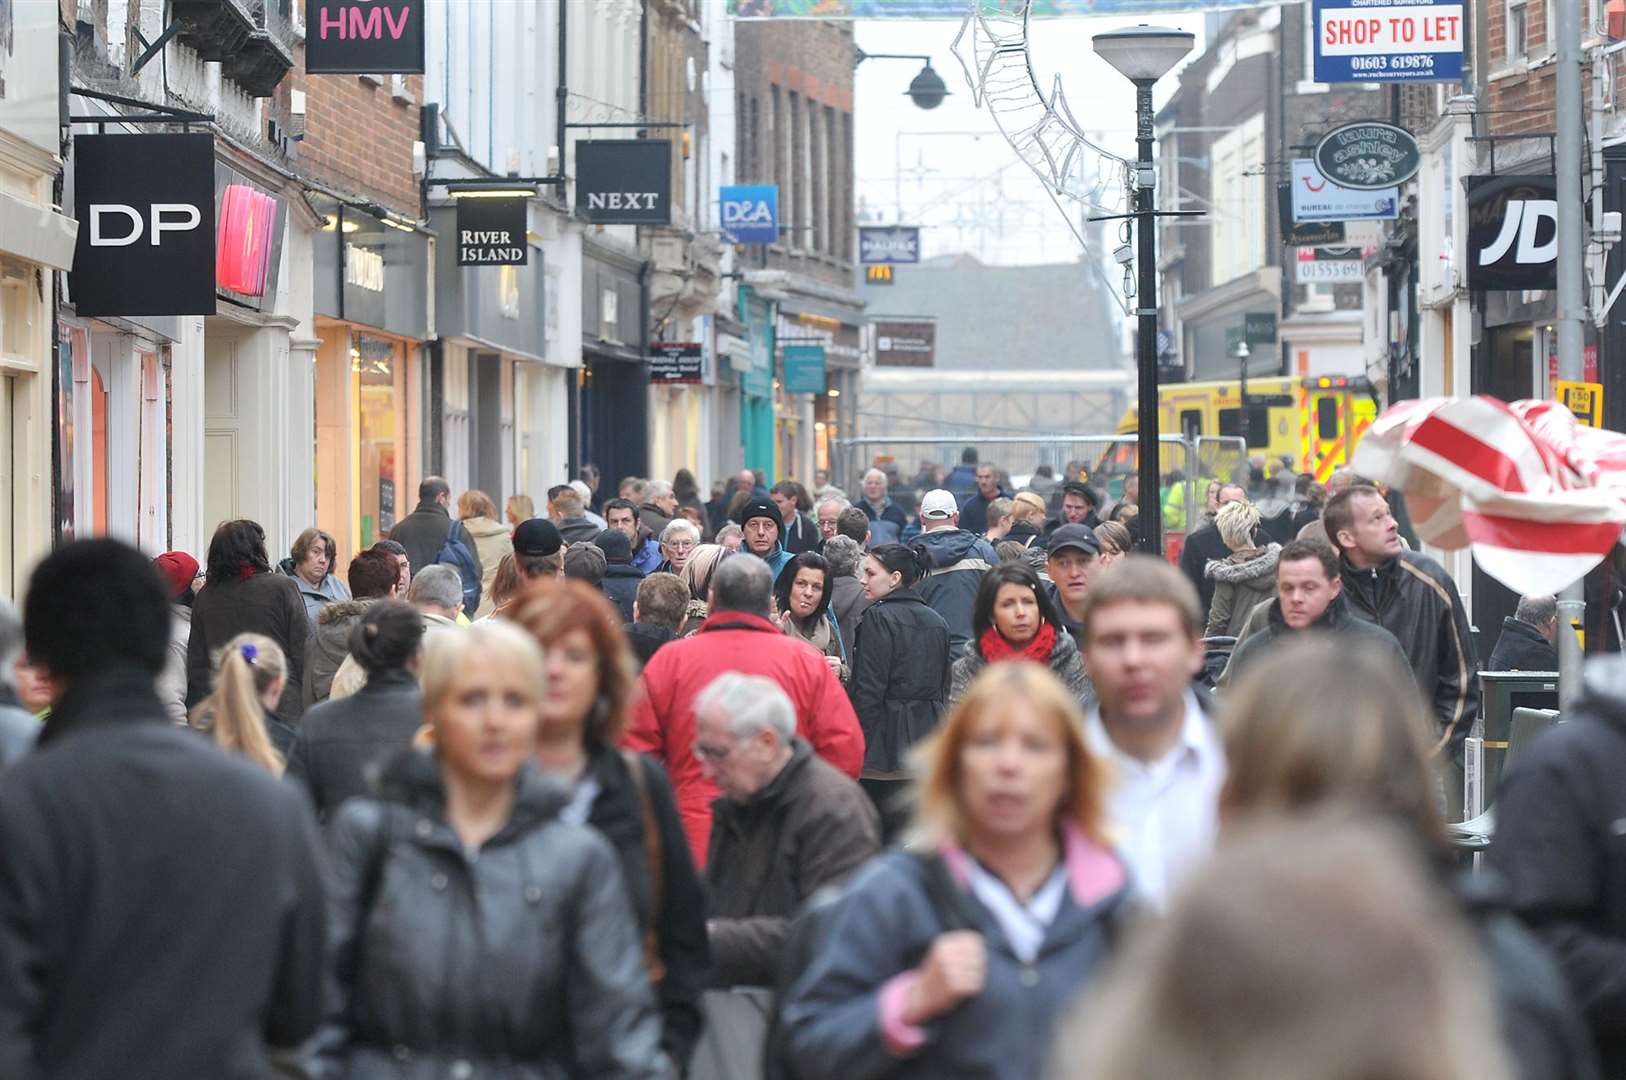 A return to busy high streets and consumer spending will be key